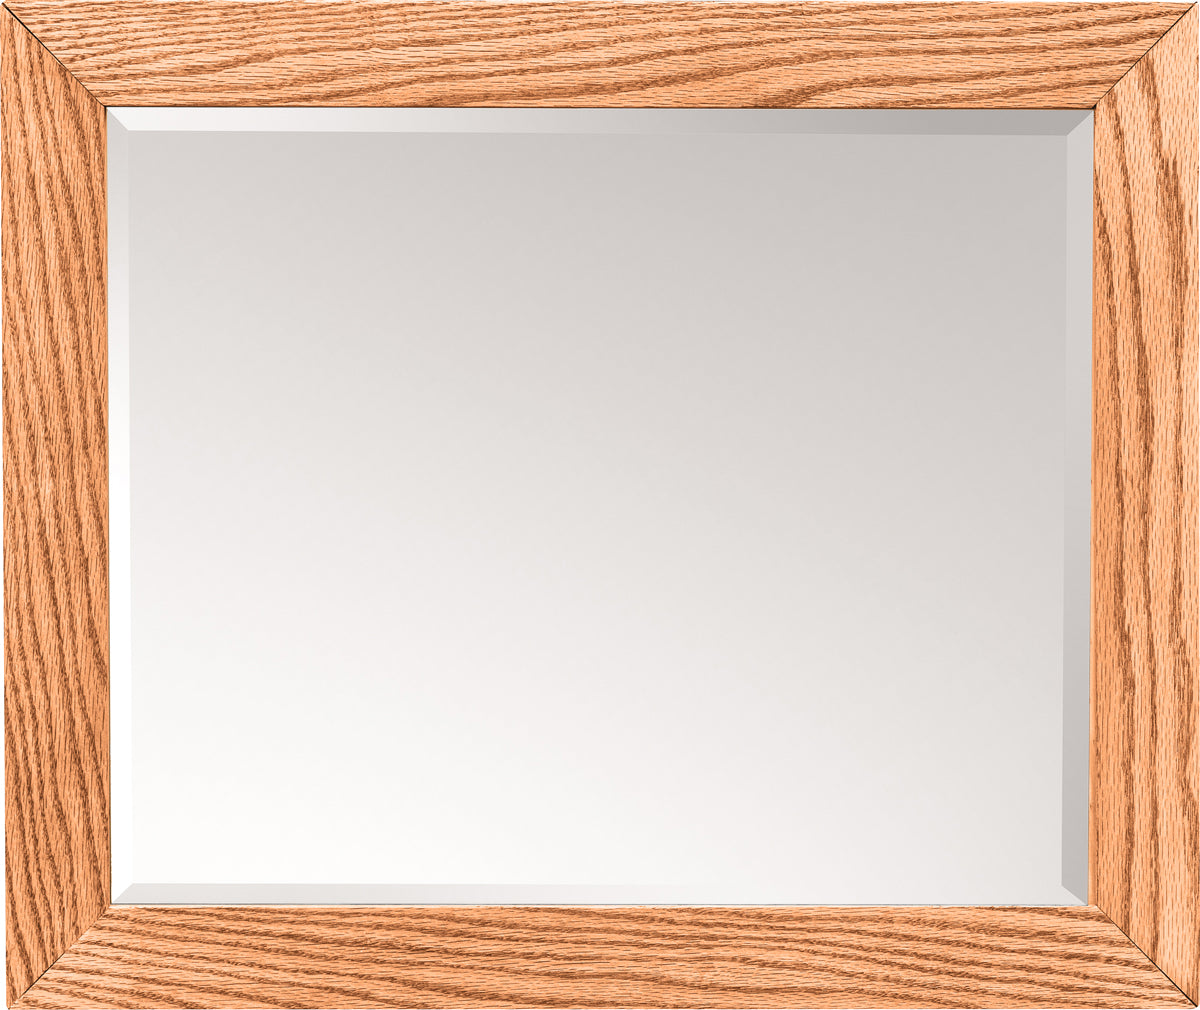 THE JEFFERSON: Mirror/ Picture 20x16 Frame